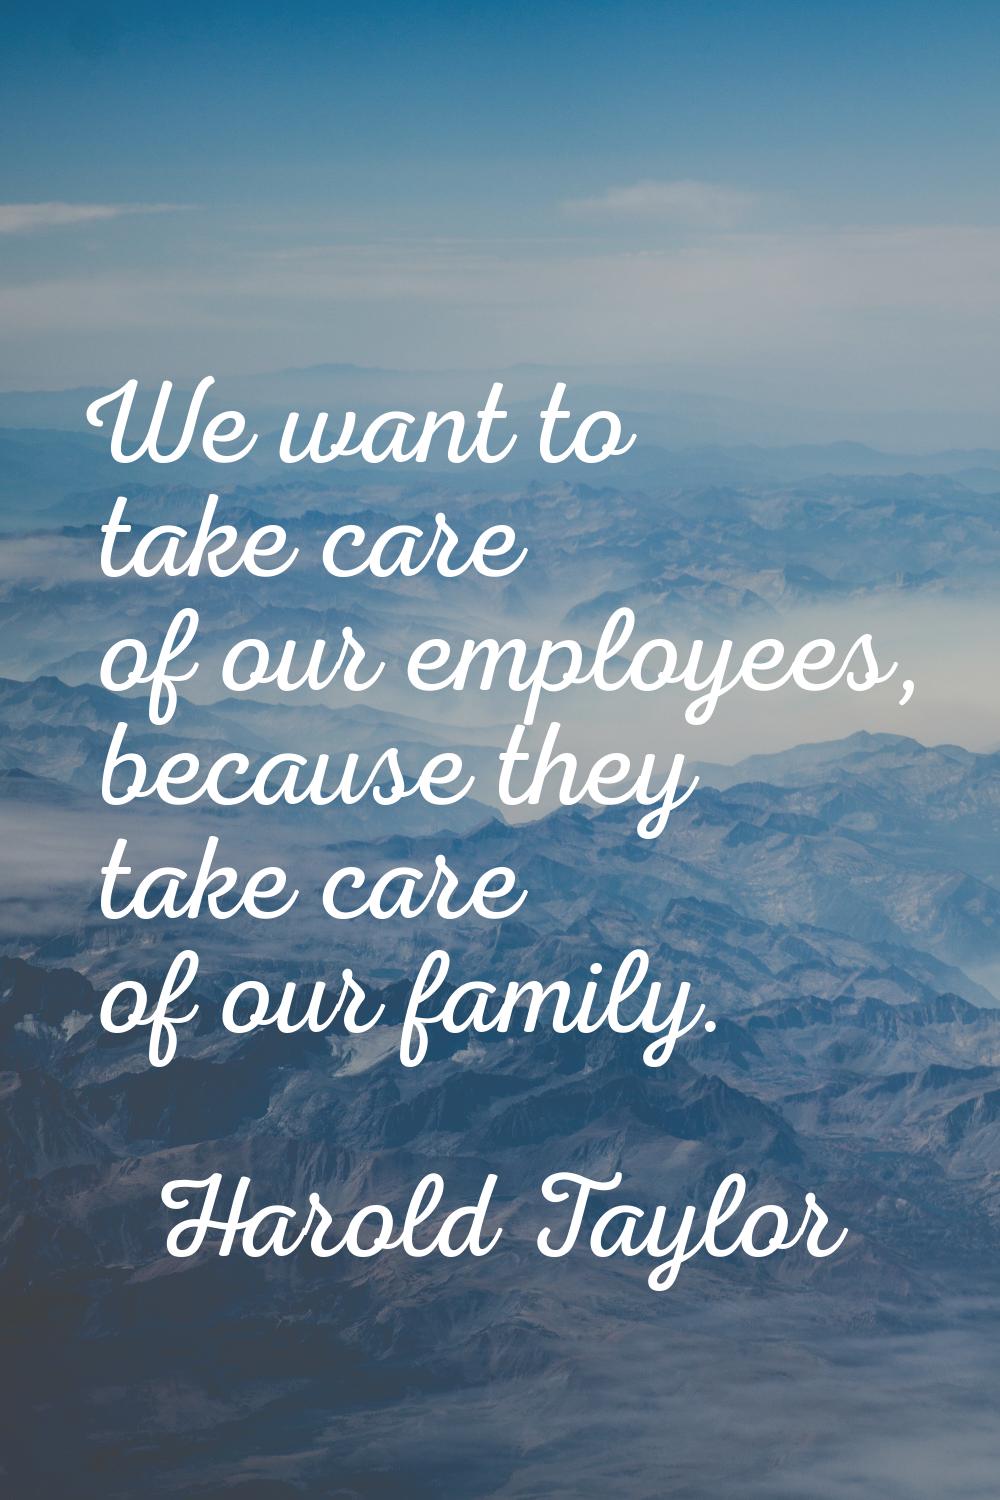 We want to take care of our employees, because they take care of our family.